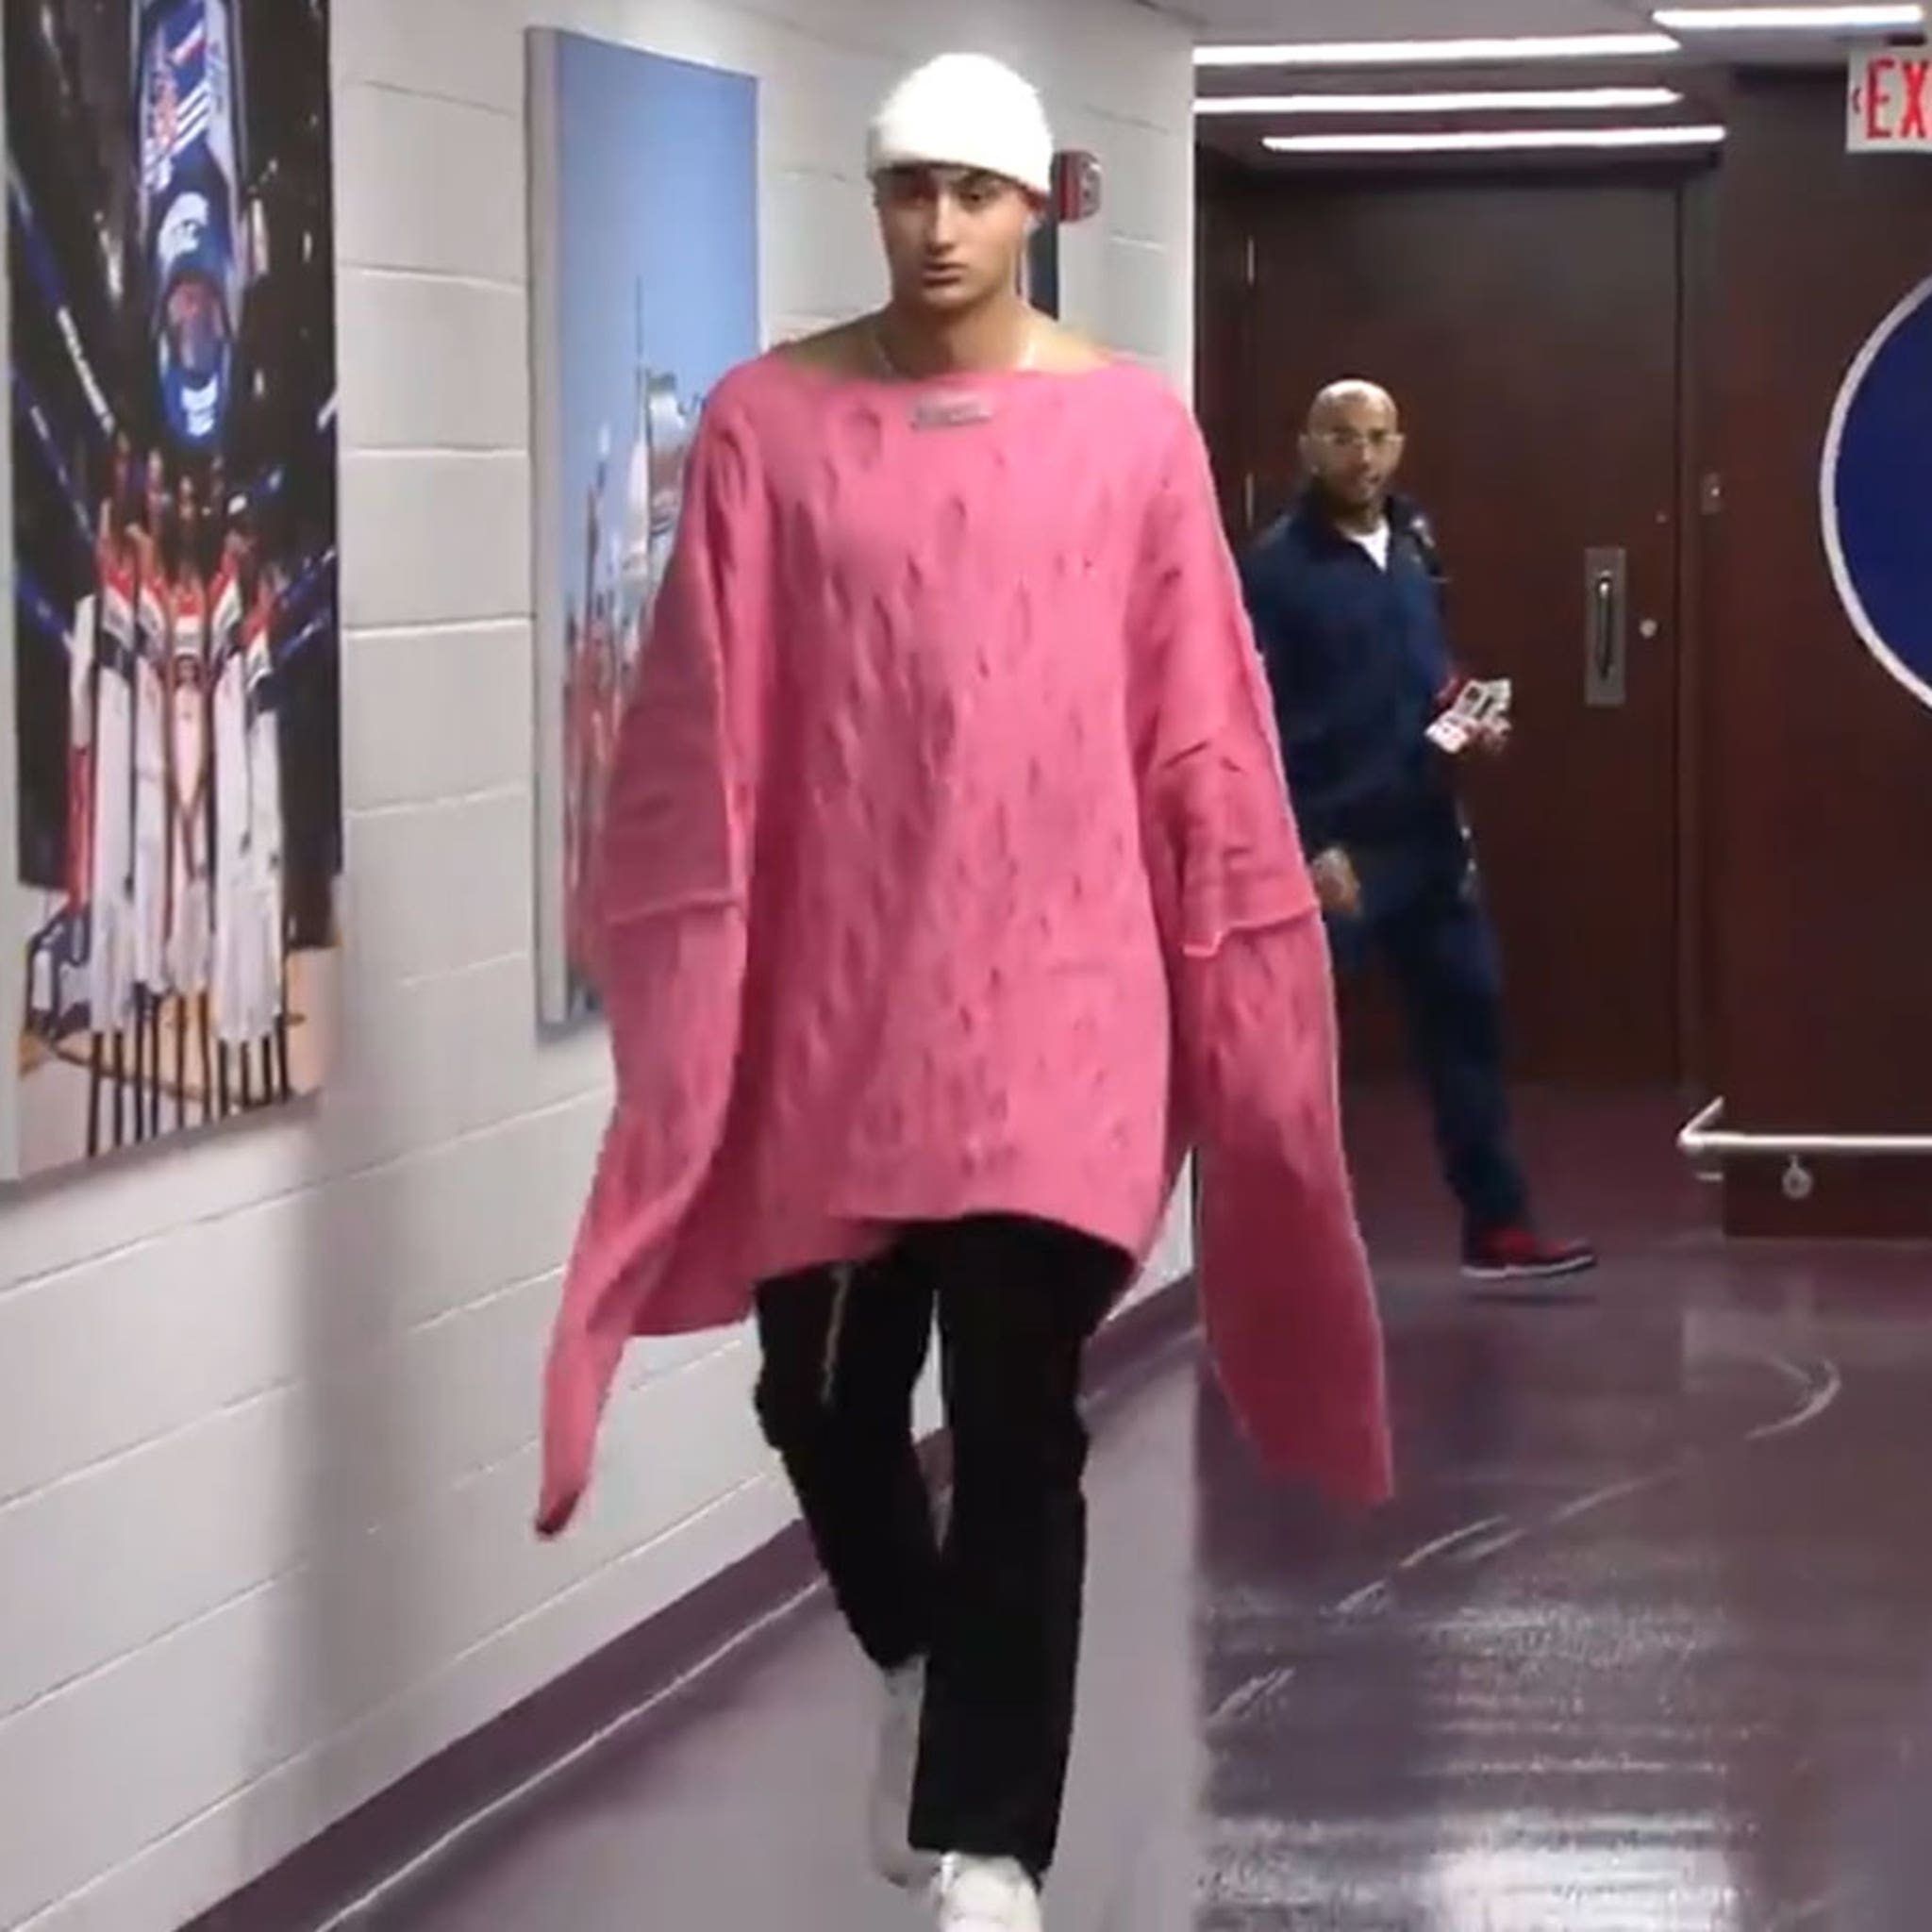 Kyle Kuzma Got Roasted by NBA Stars on Instagram for Absolutely Awful Outfit